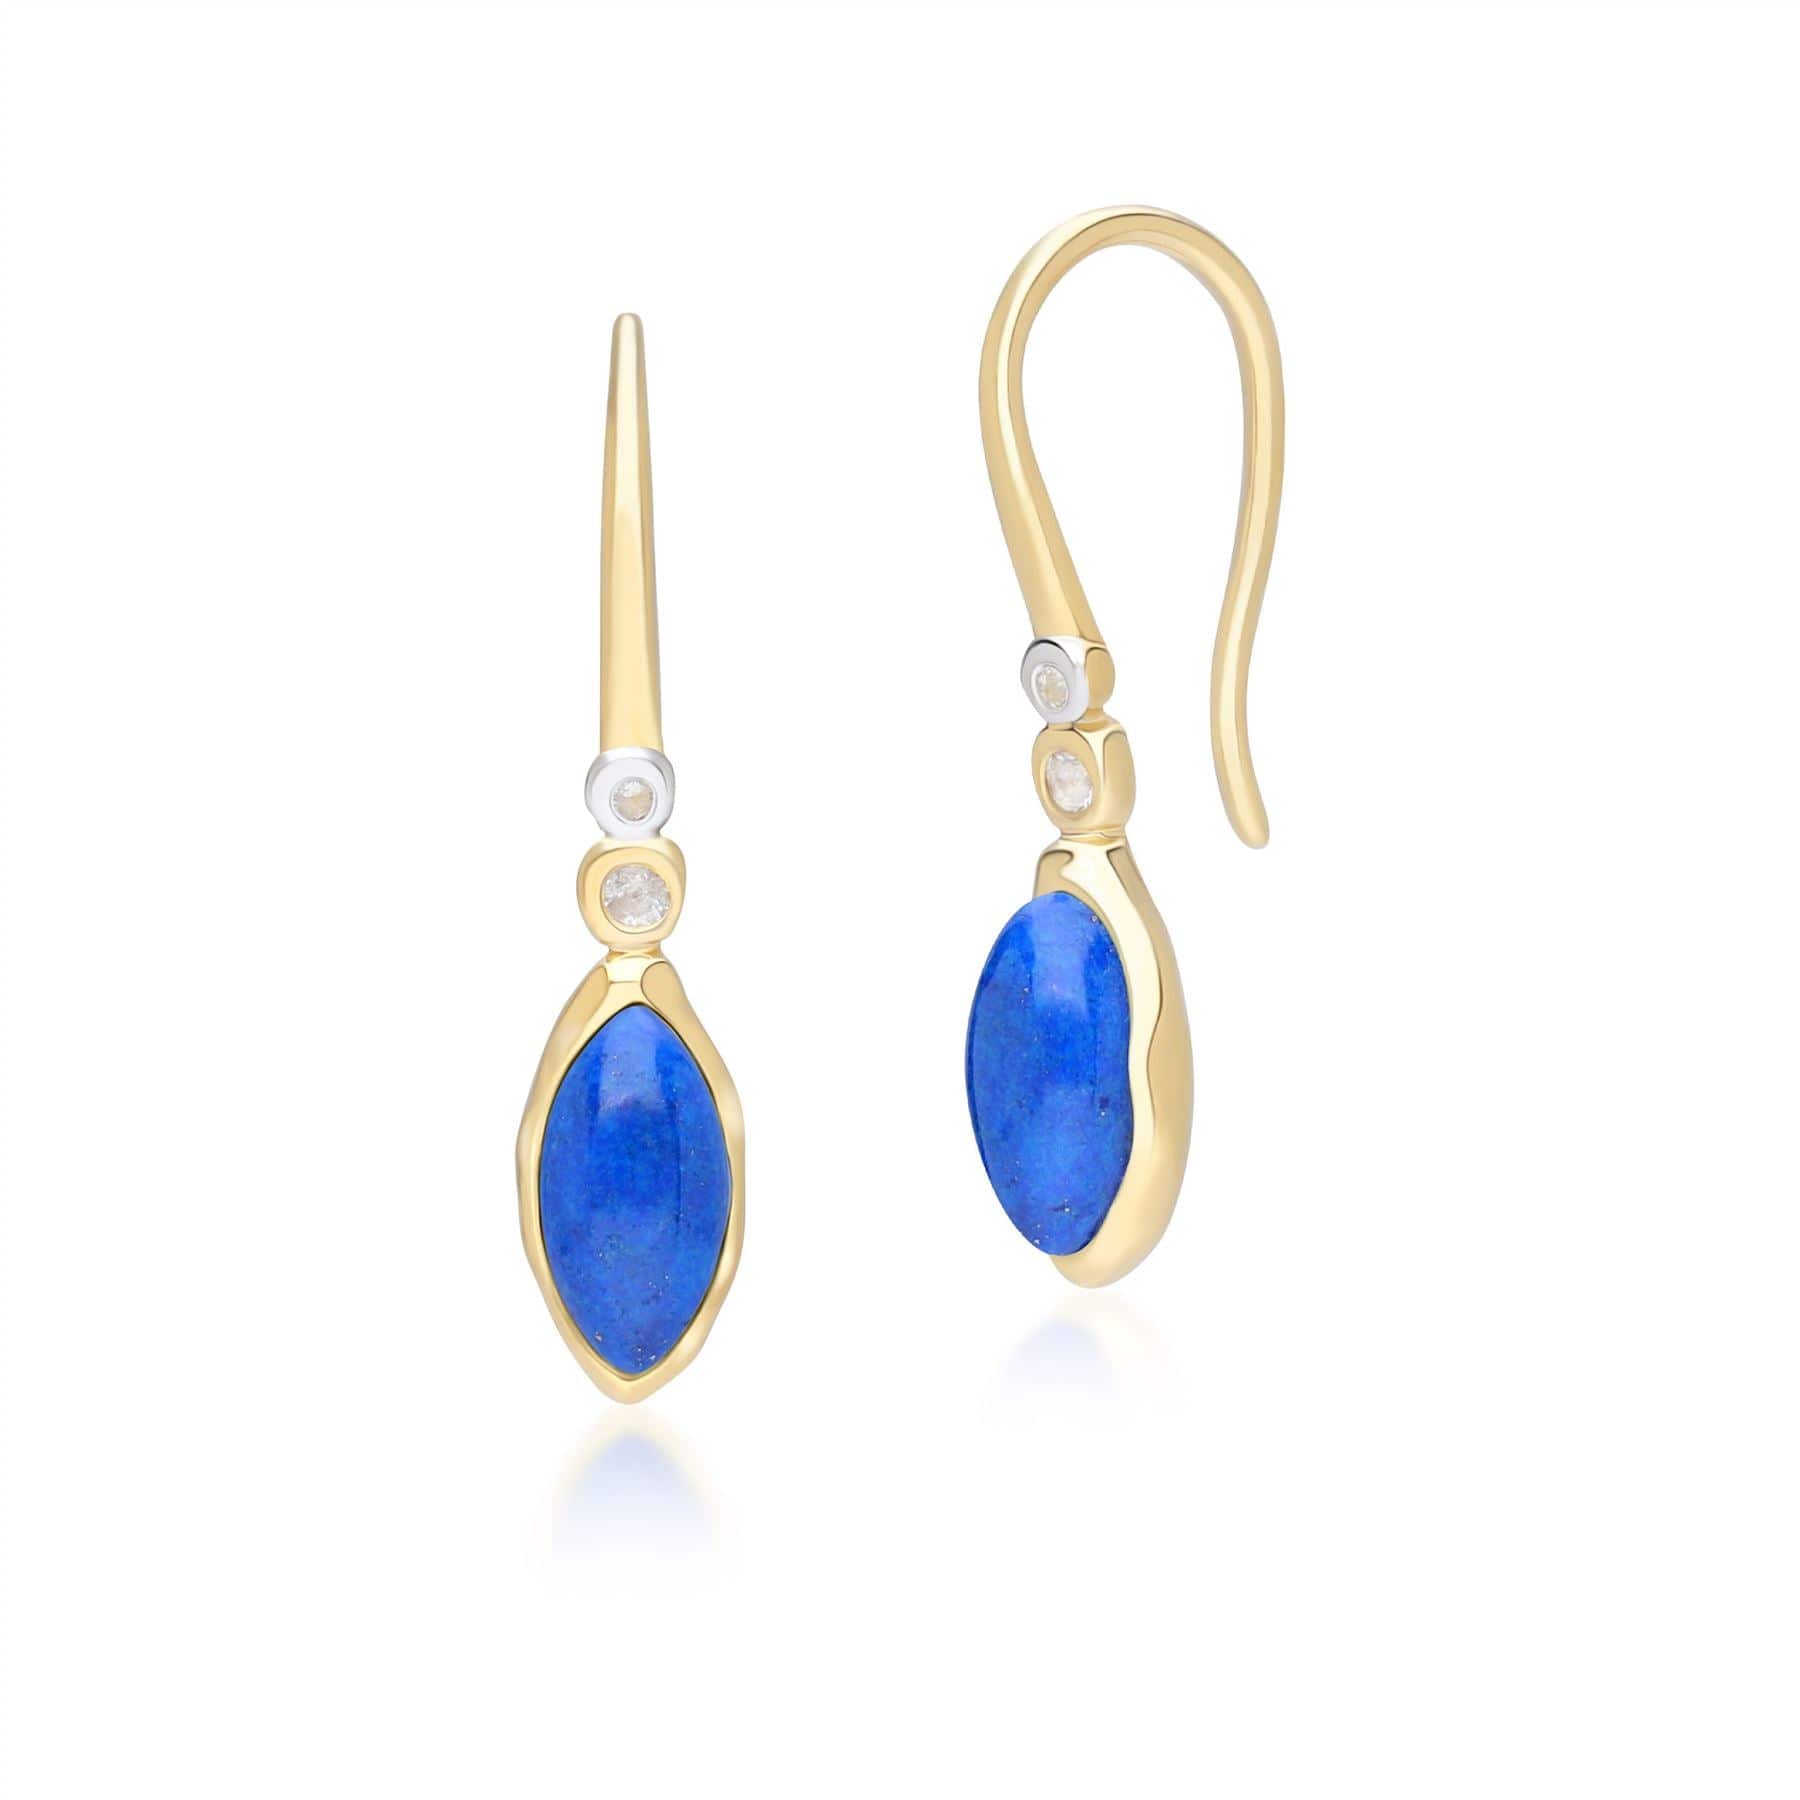 253E418601925 Irregular Marquise Lapis Lazuli & Topaz Drop Earrings In 18ct Gold Plated Sterling Silver Front